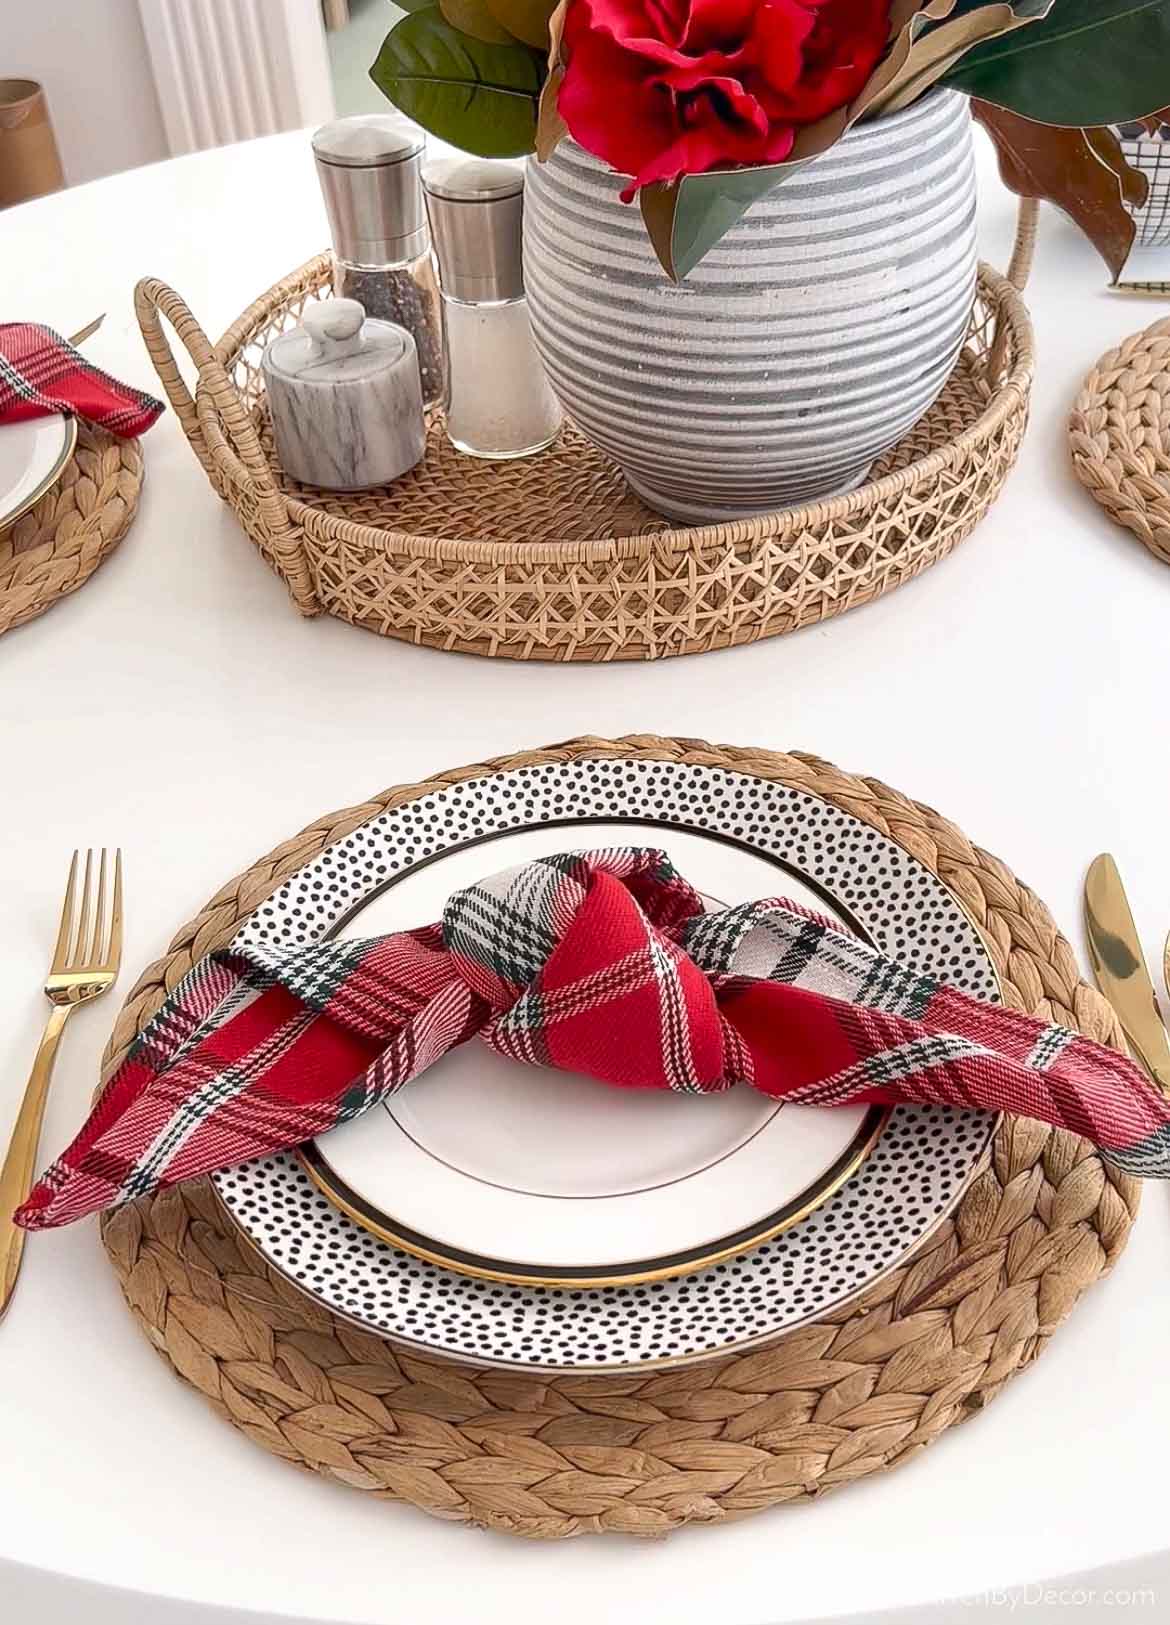 Mix and match your plates for an eclectic Thanksgiving table